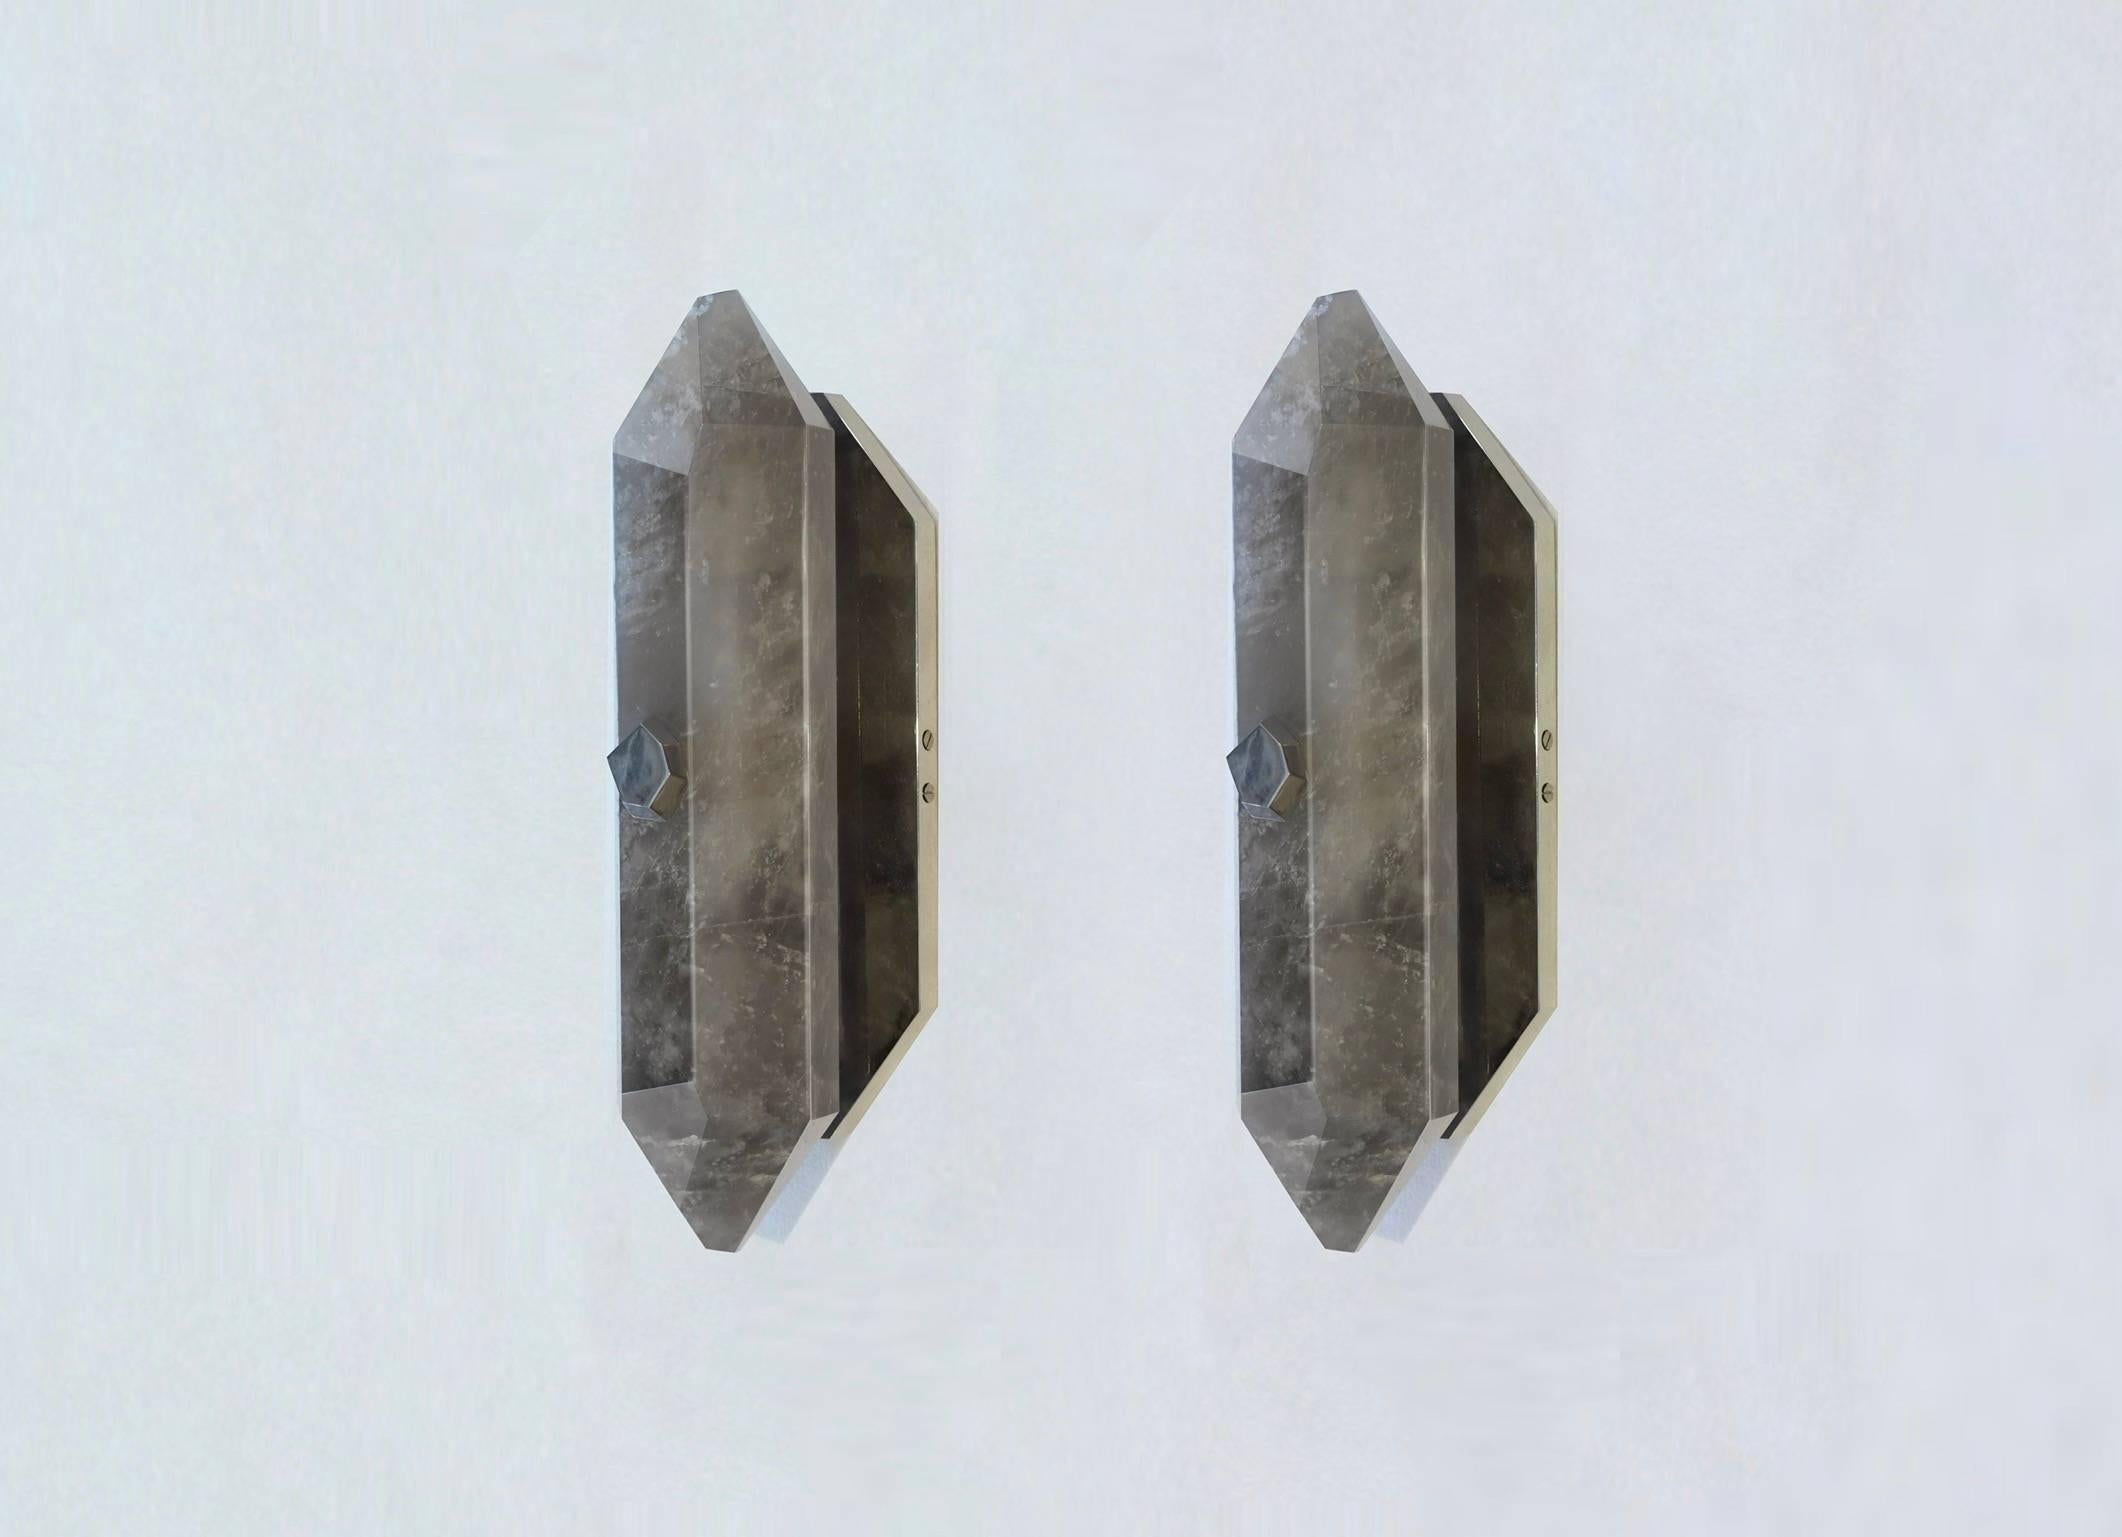 A fine carved diamond form dark rock crystal quartz wall sconces with the polish nickel finish mount. created by Phoenix Gallery.
Custom measurement and finish available.
Each sconce installed two sockets, each socket use 60 watts LED light bulb and